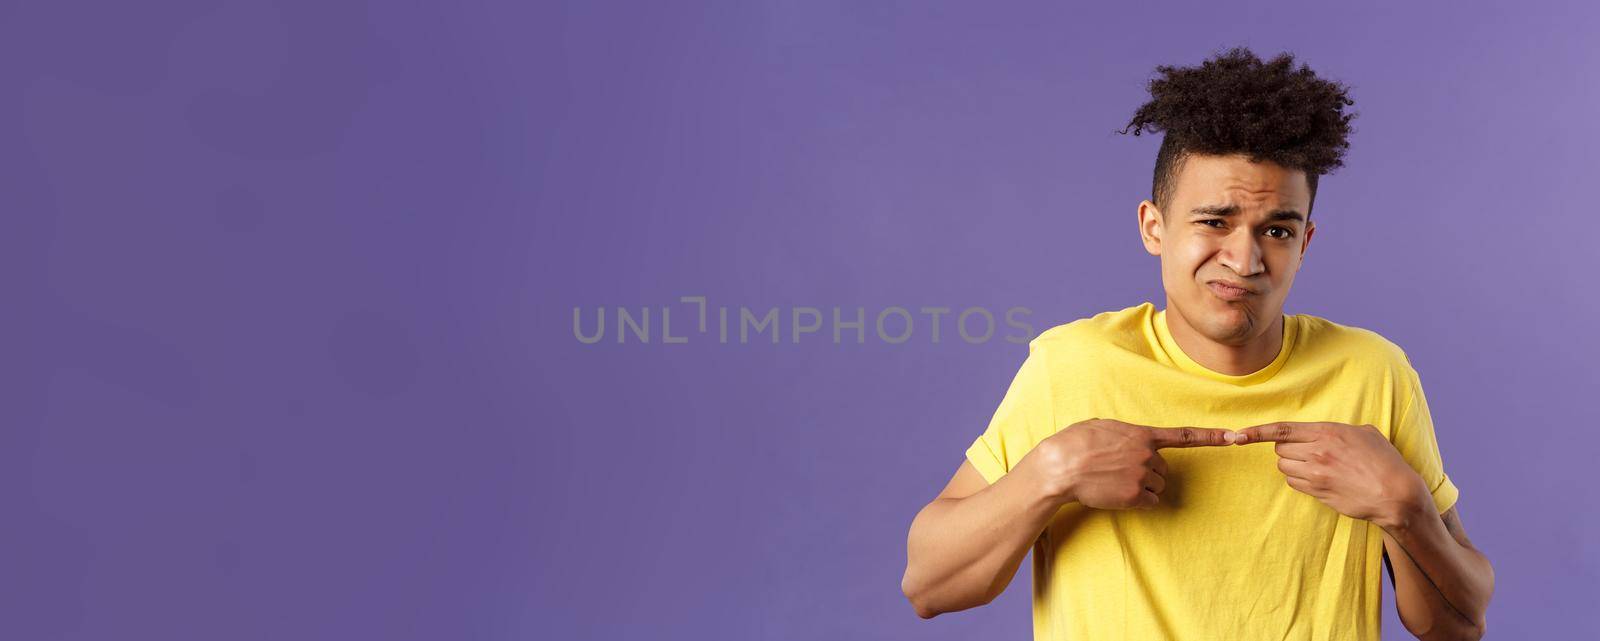 Close-up portrait of shy and modest young silly hispanic man trying say something but being too insecure, grimacing and frowning, look timid, two fingers touching pose, purple background by Benzoix